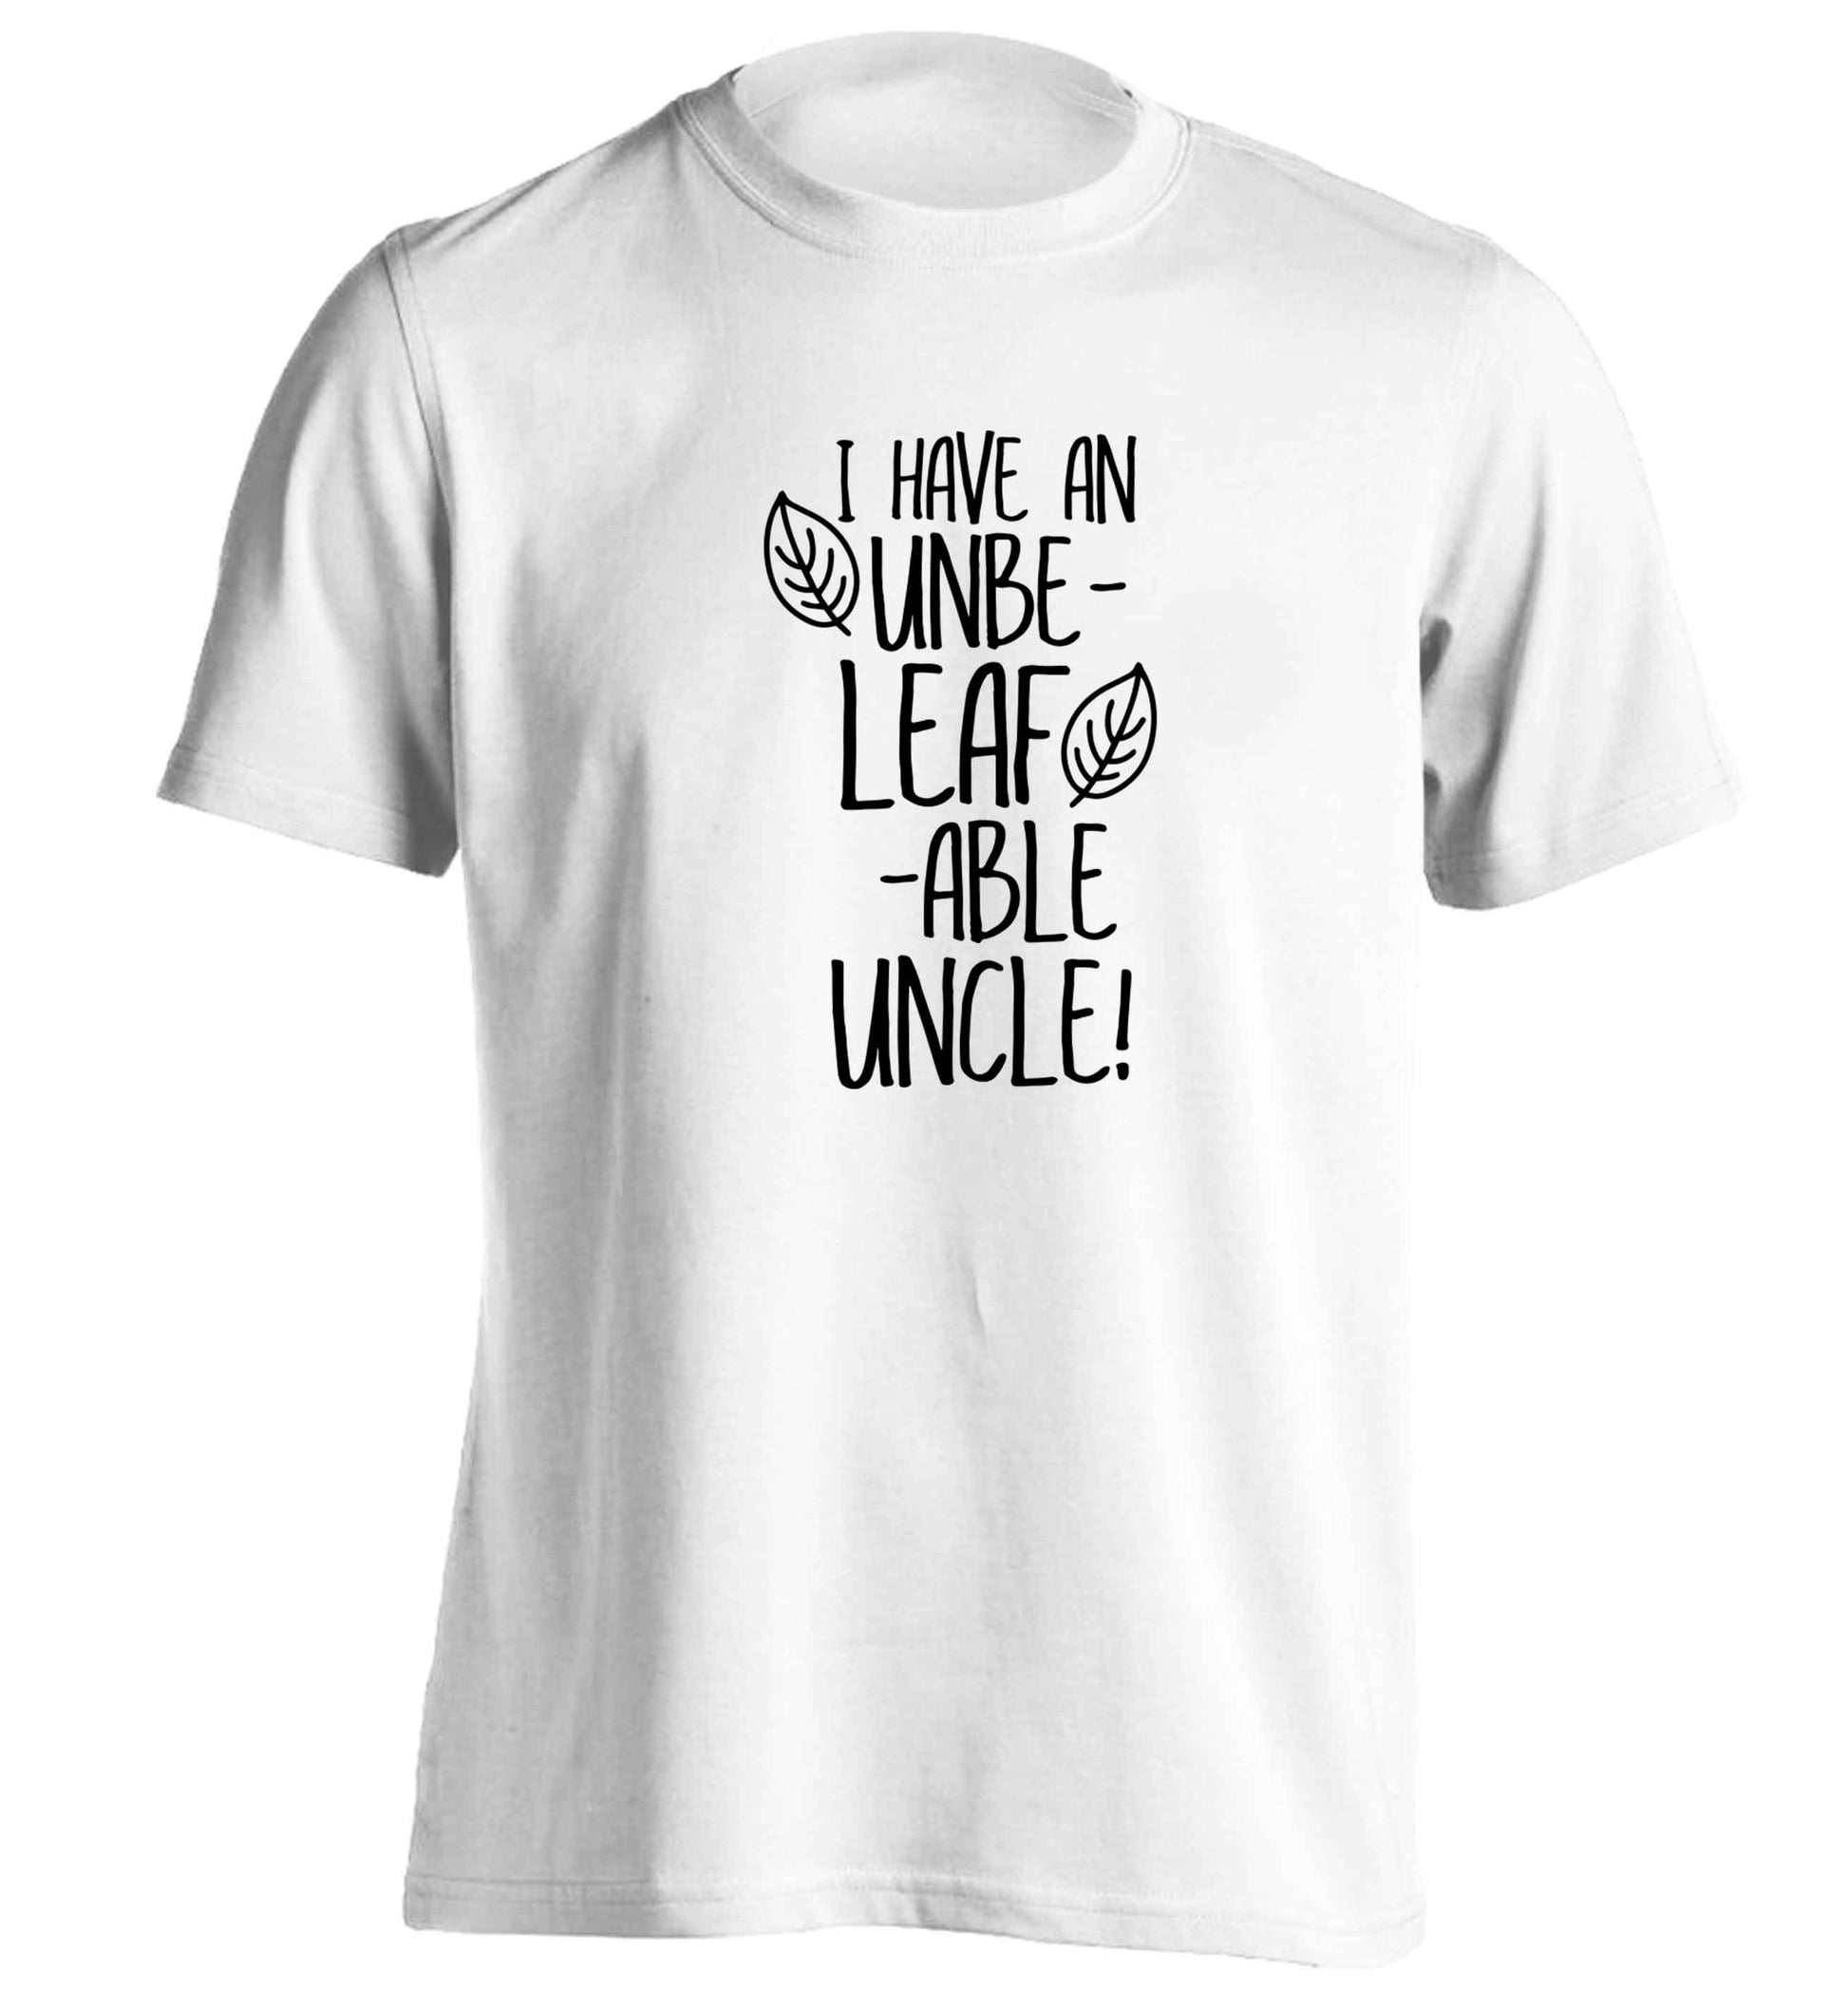 I have an unbe-leaf-able uncle adults unisex white Tshirt 2XL